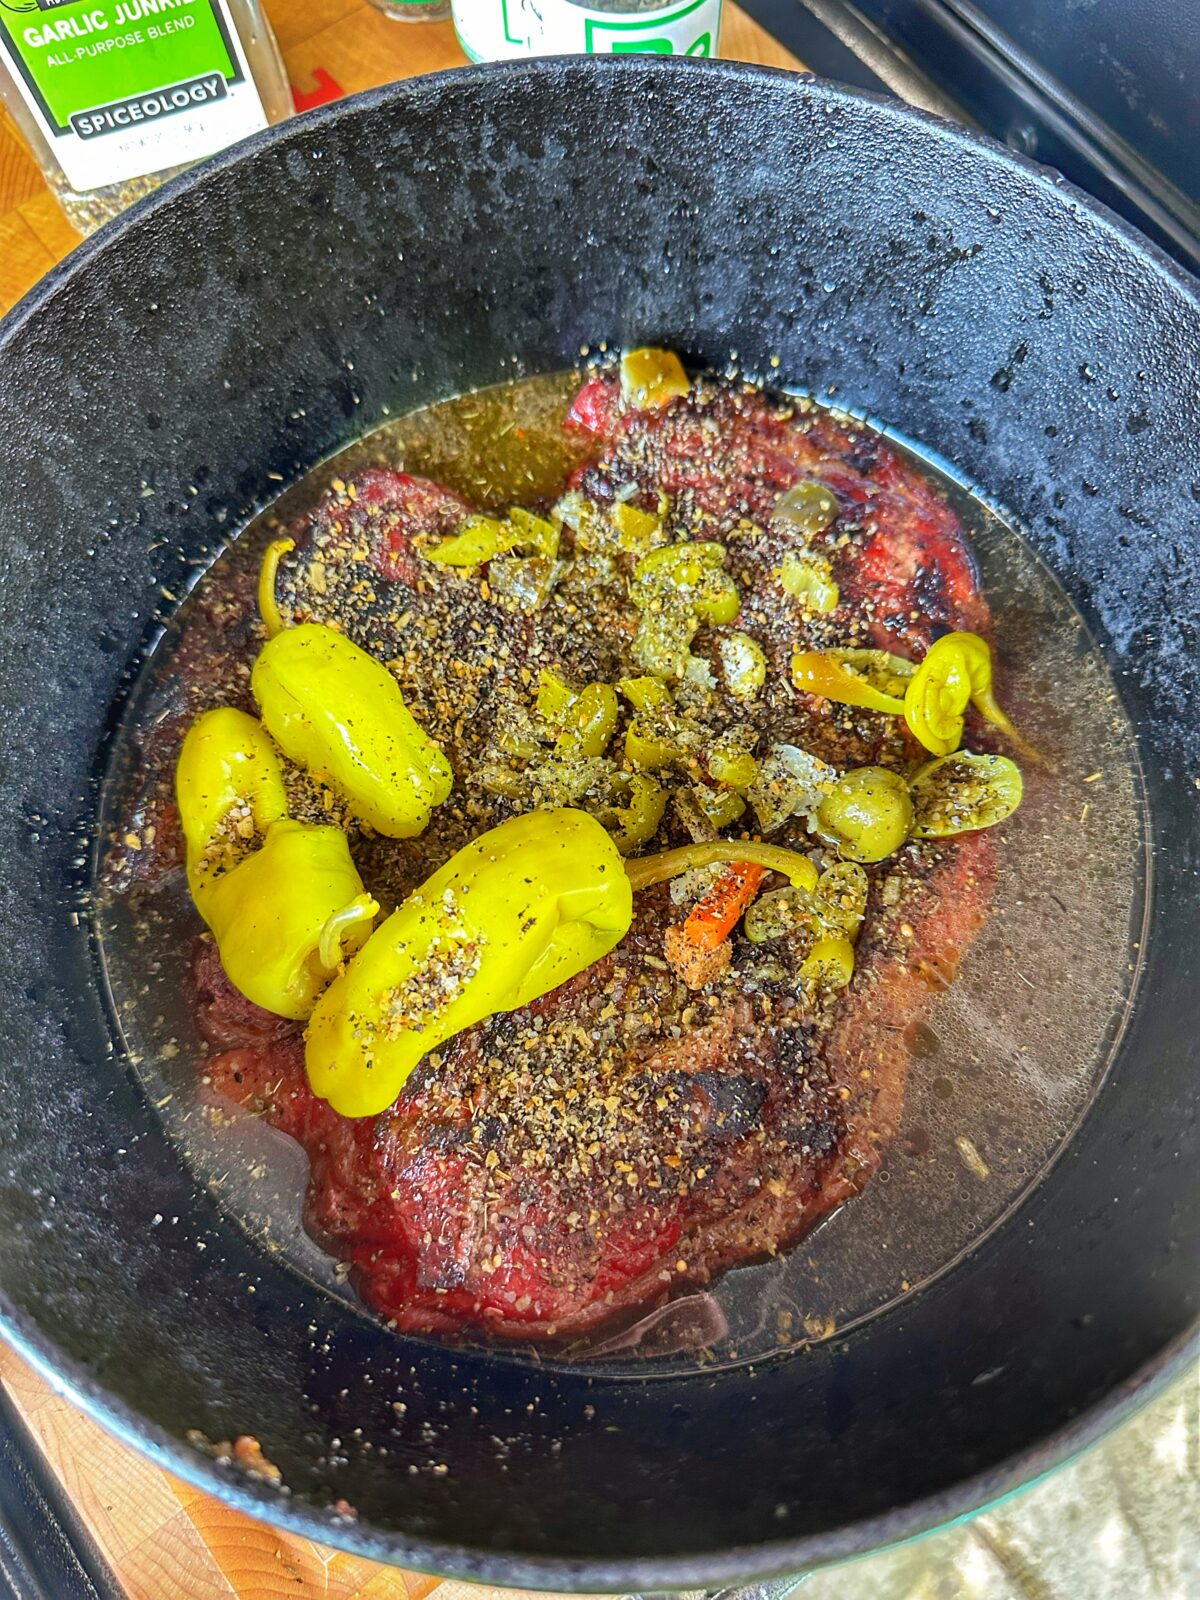 Seared chuck roast in a cast iron dutch oven with braising ingredients.